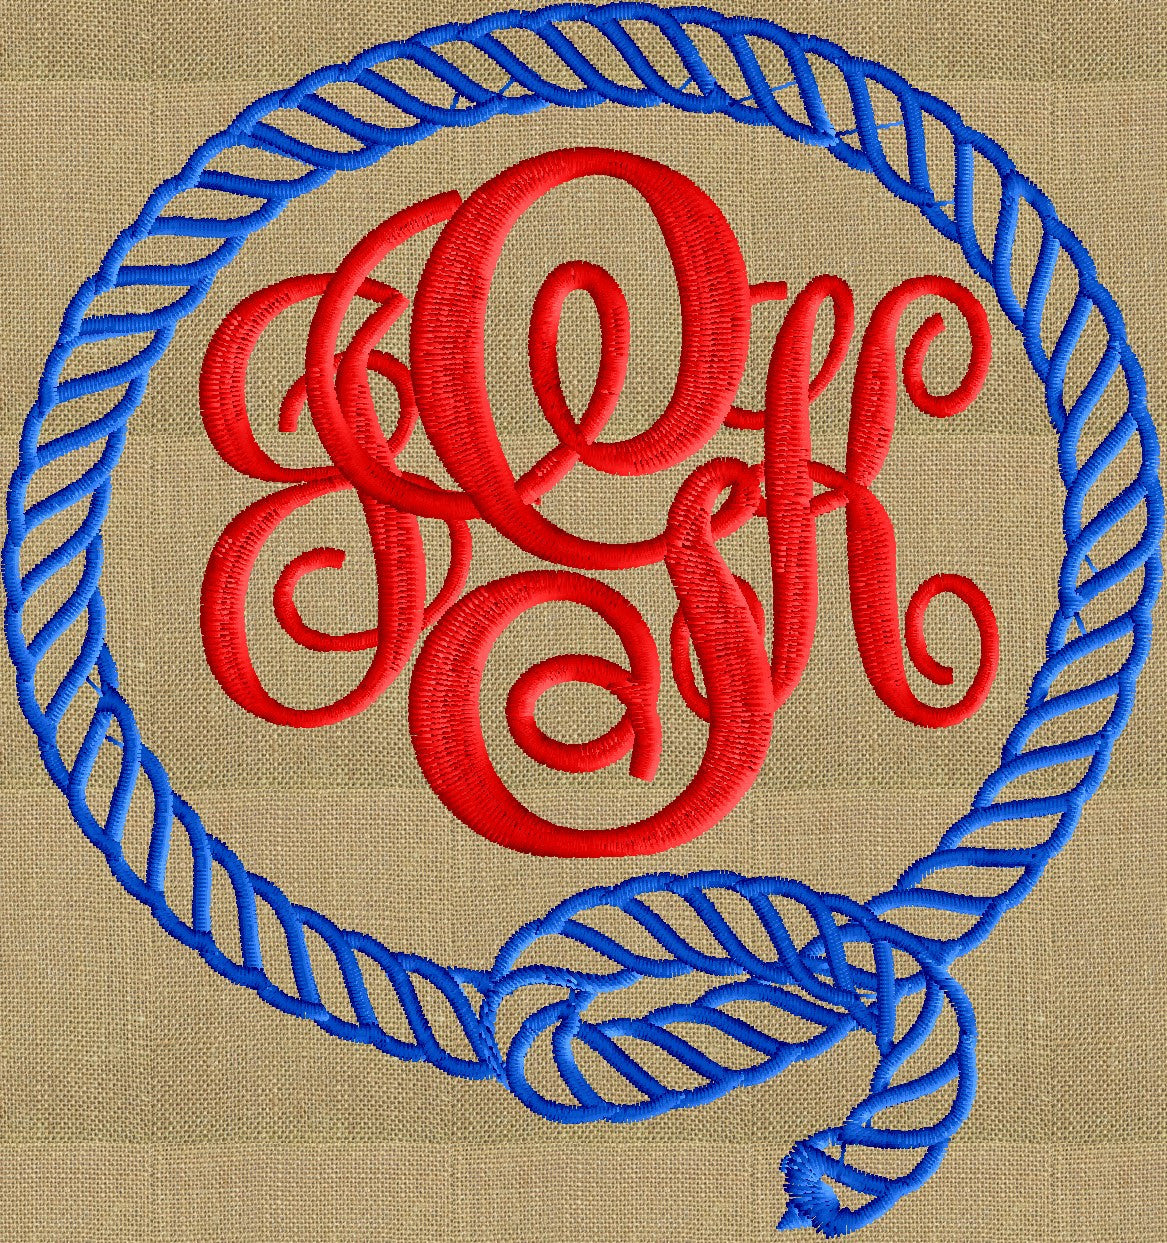 Rope Round Font Frame Monogram Embroidery Design - Font not included - in 2 sizes - Instant download - Hus Dst Exp Vp3 Jef Pes formats